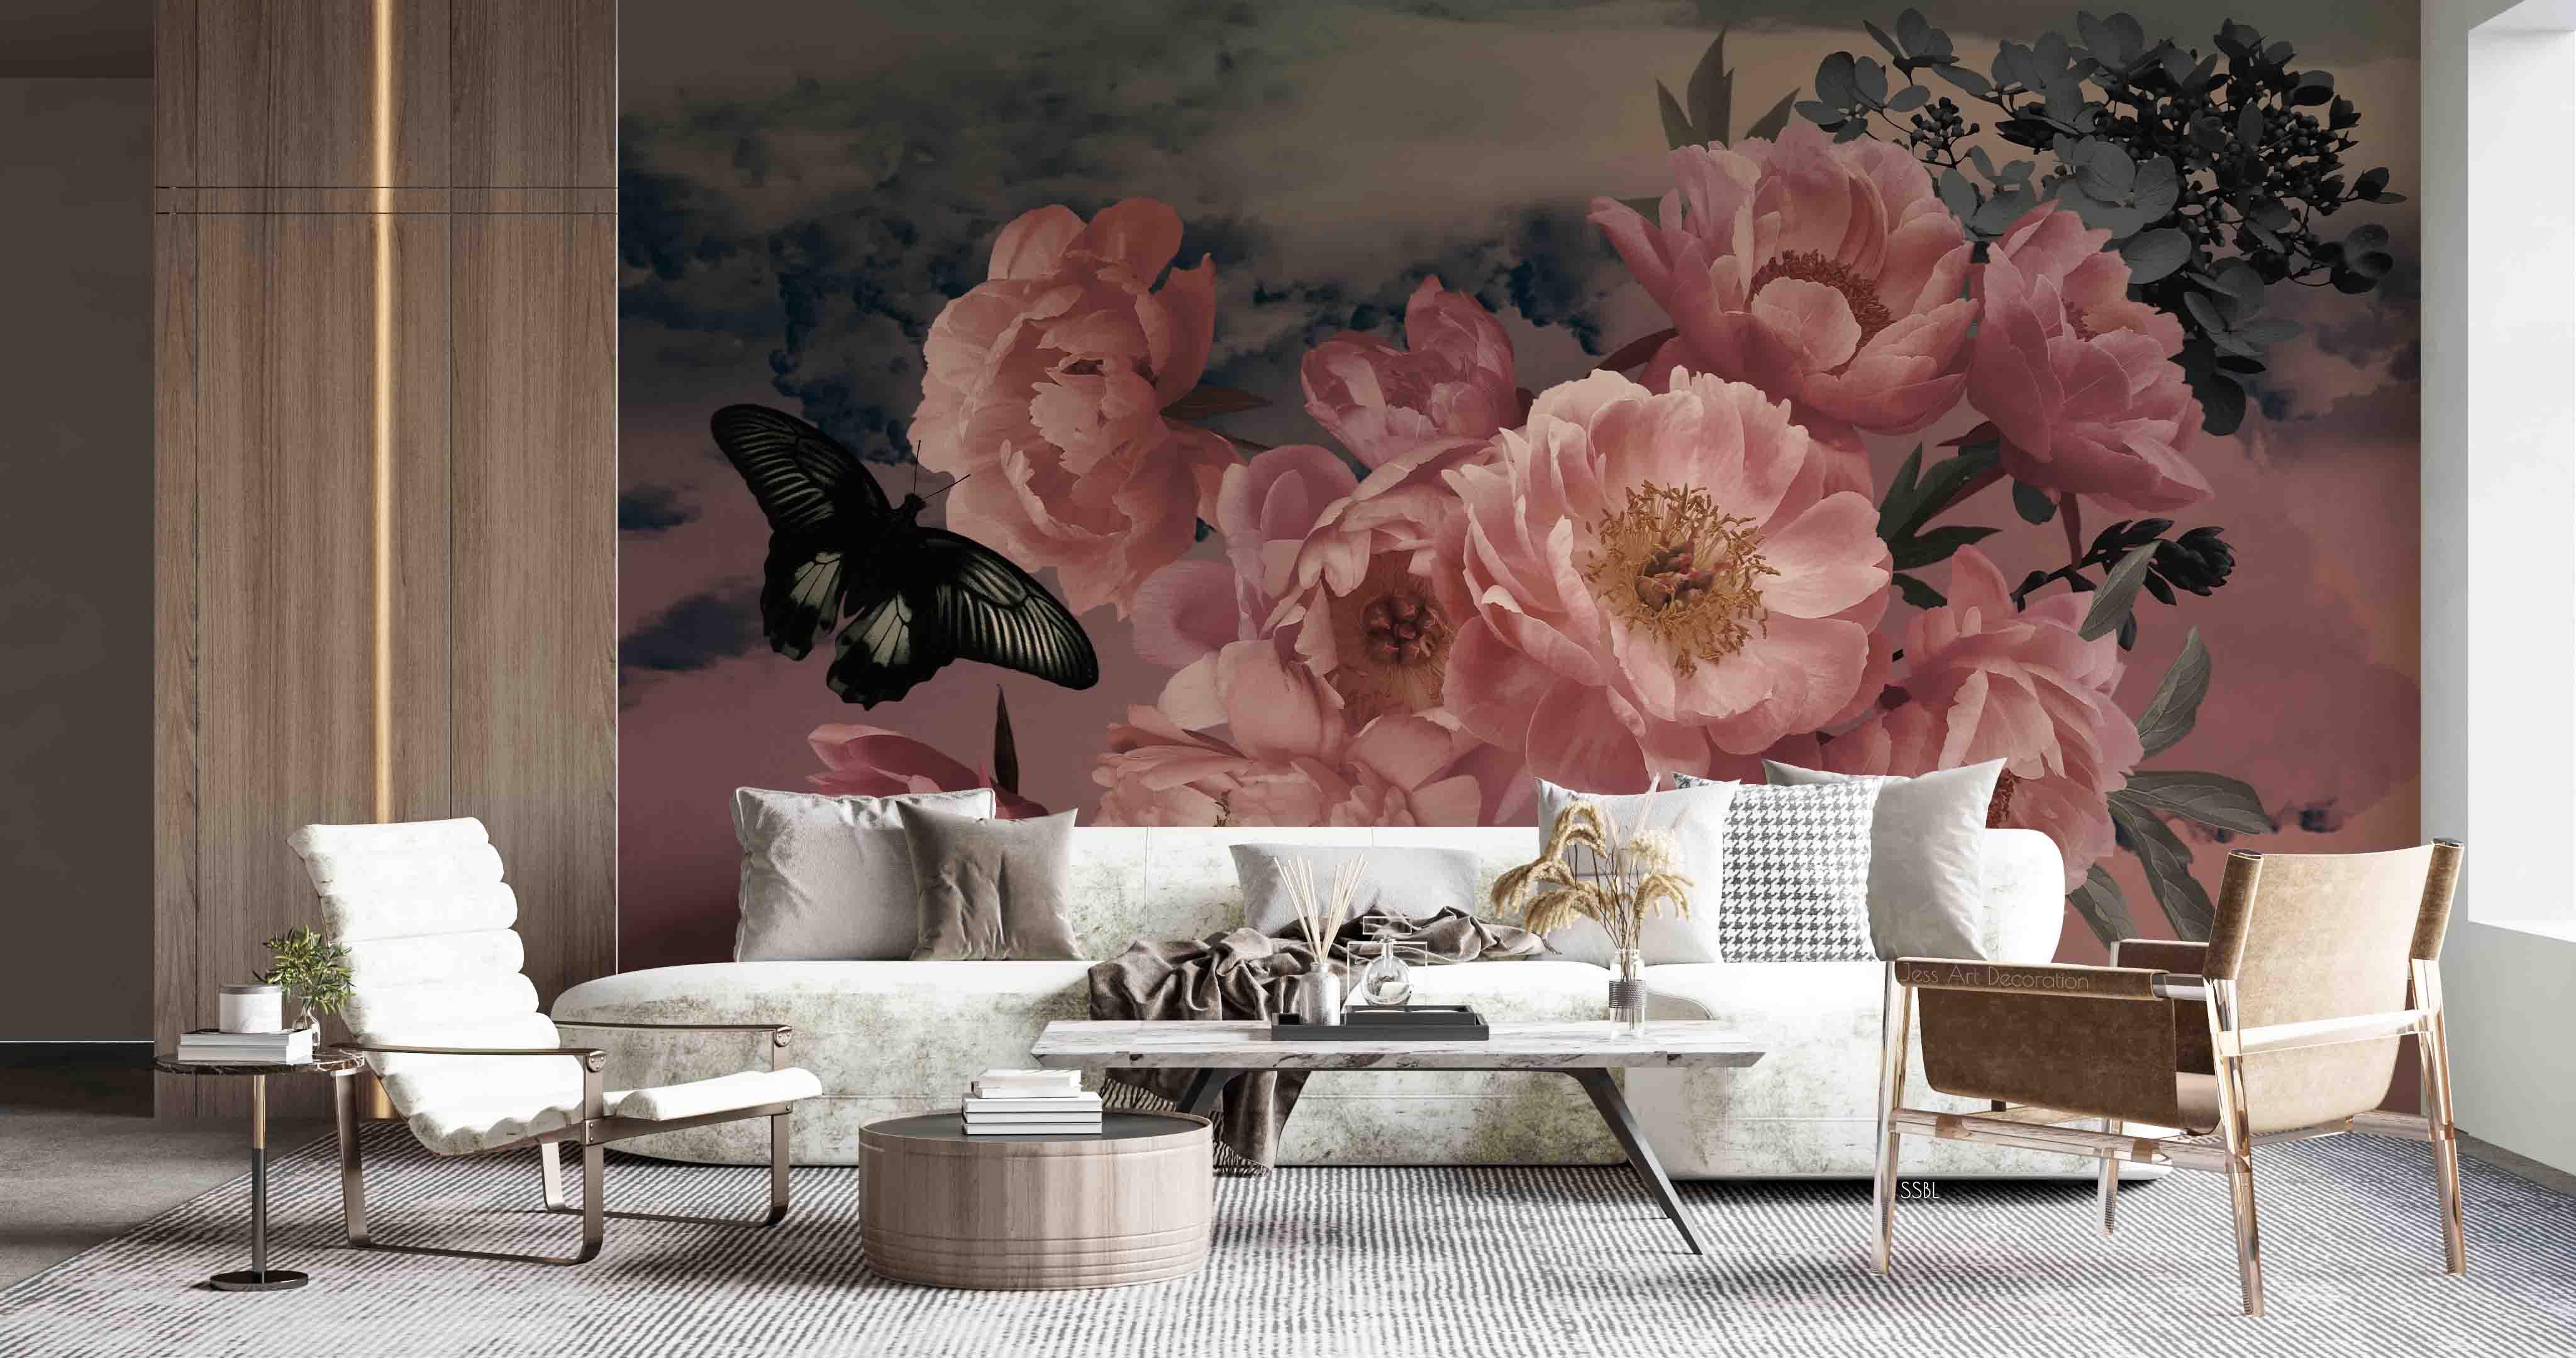 3D Vintage Baroque Art Blooming Pink Peony Black Butterfly Background Wall Mural Wallpaper GD 3566- Jess Art Decoration